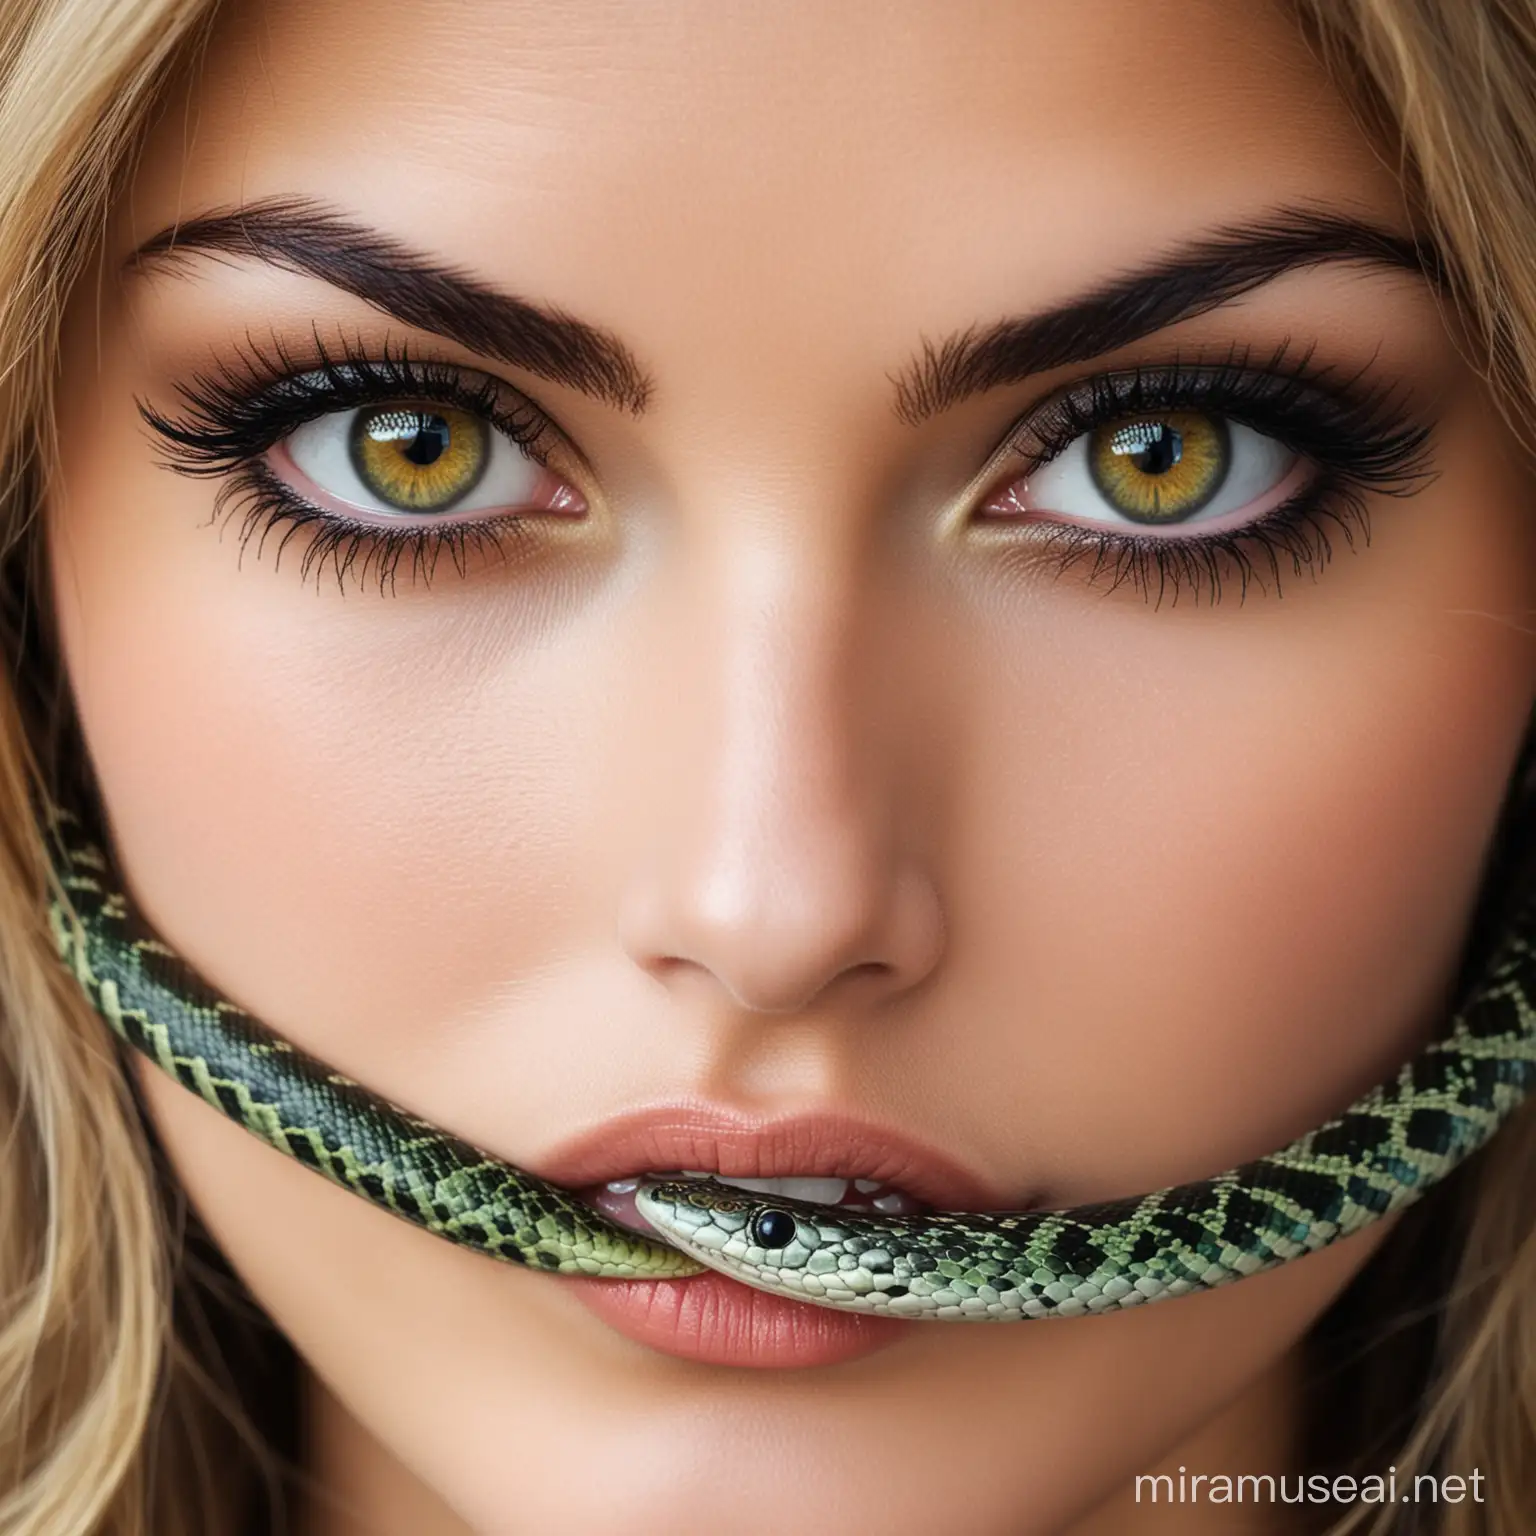 Enigmatic Beauty with Serpent Gaze